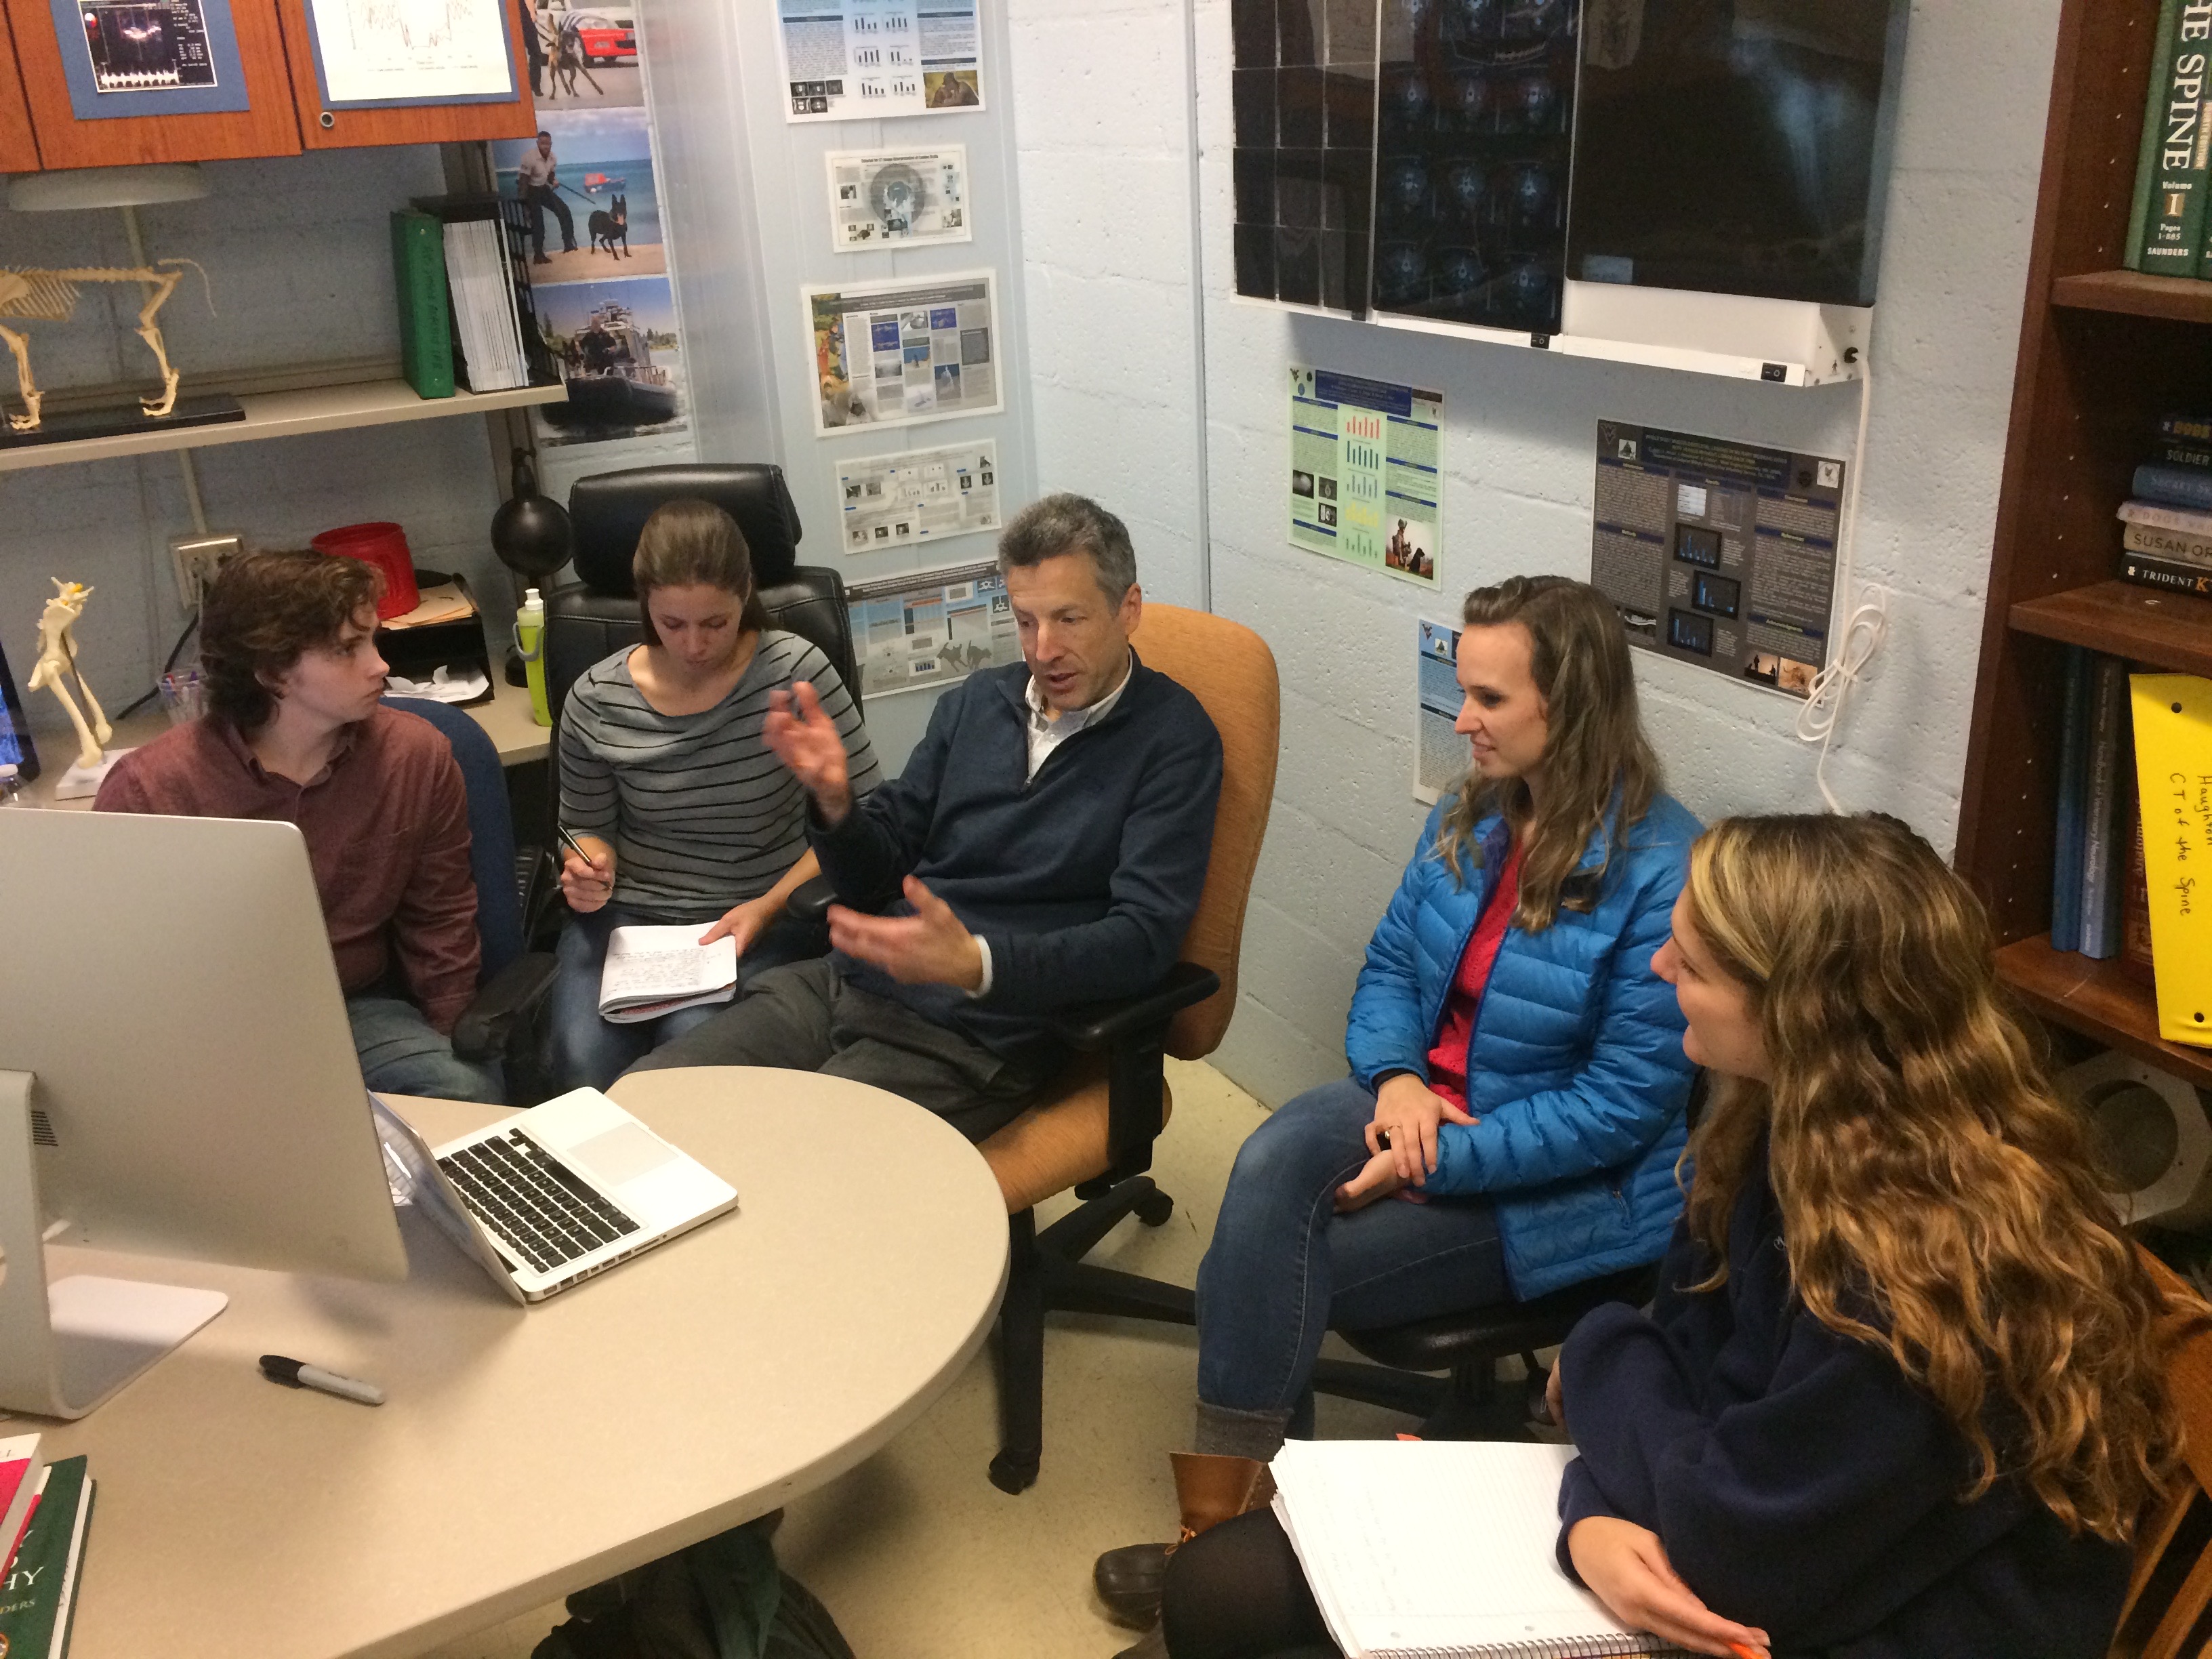 Dr. Andrew Worth from Massey University in New Zealand meeting with students in Dr. Jones’ research lab in 2017 to discuss his current research on lumbosacral disease in working dogs.